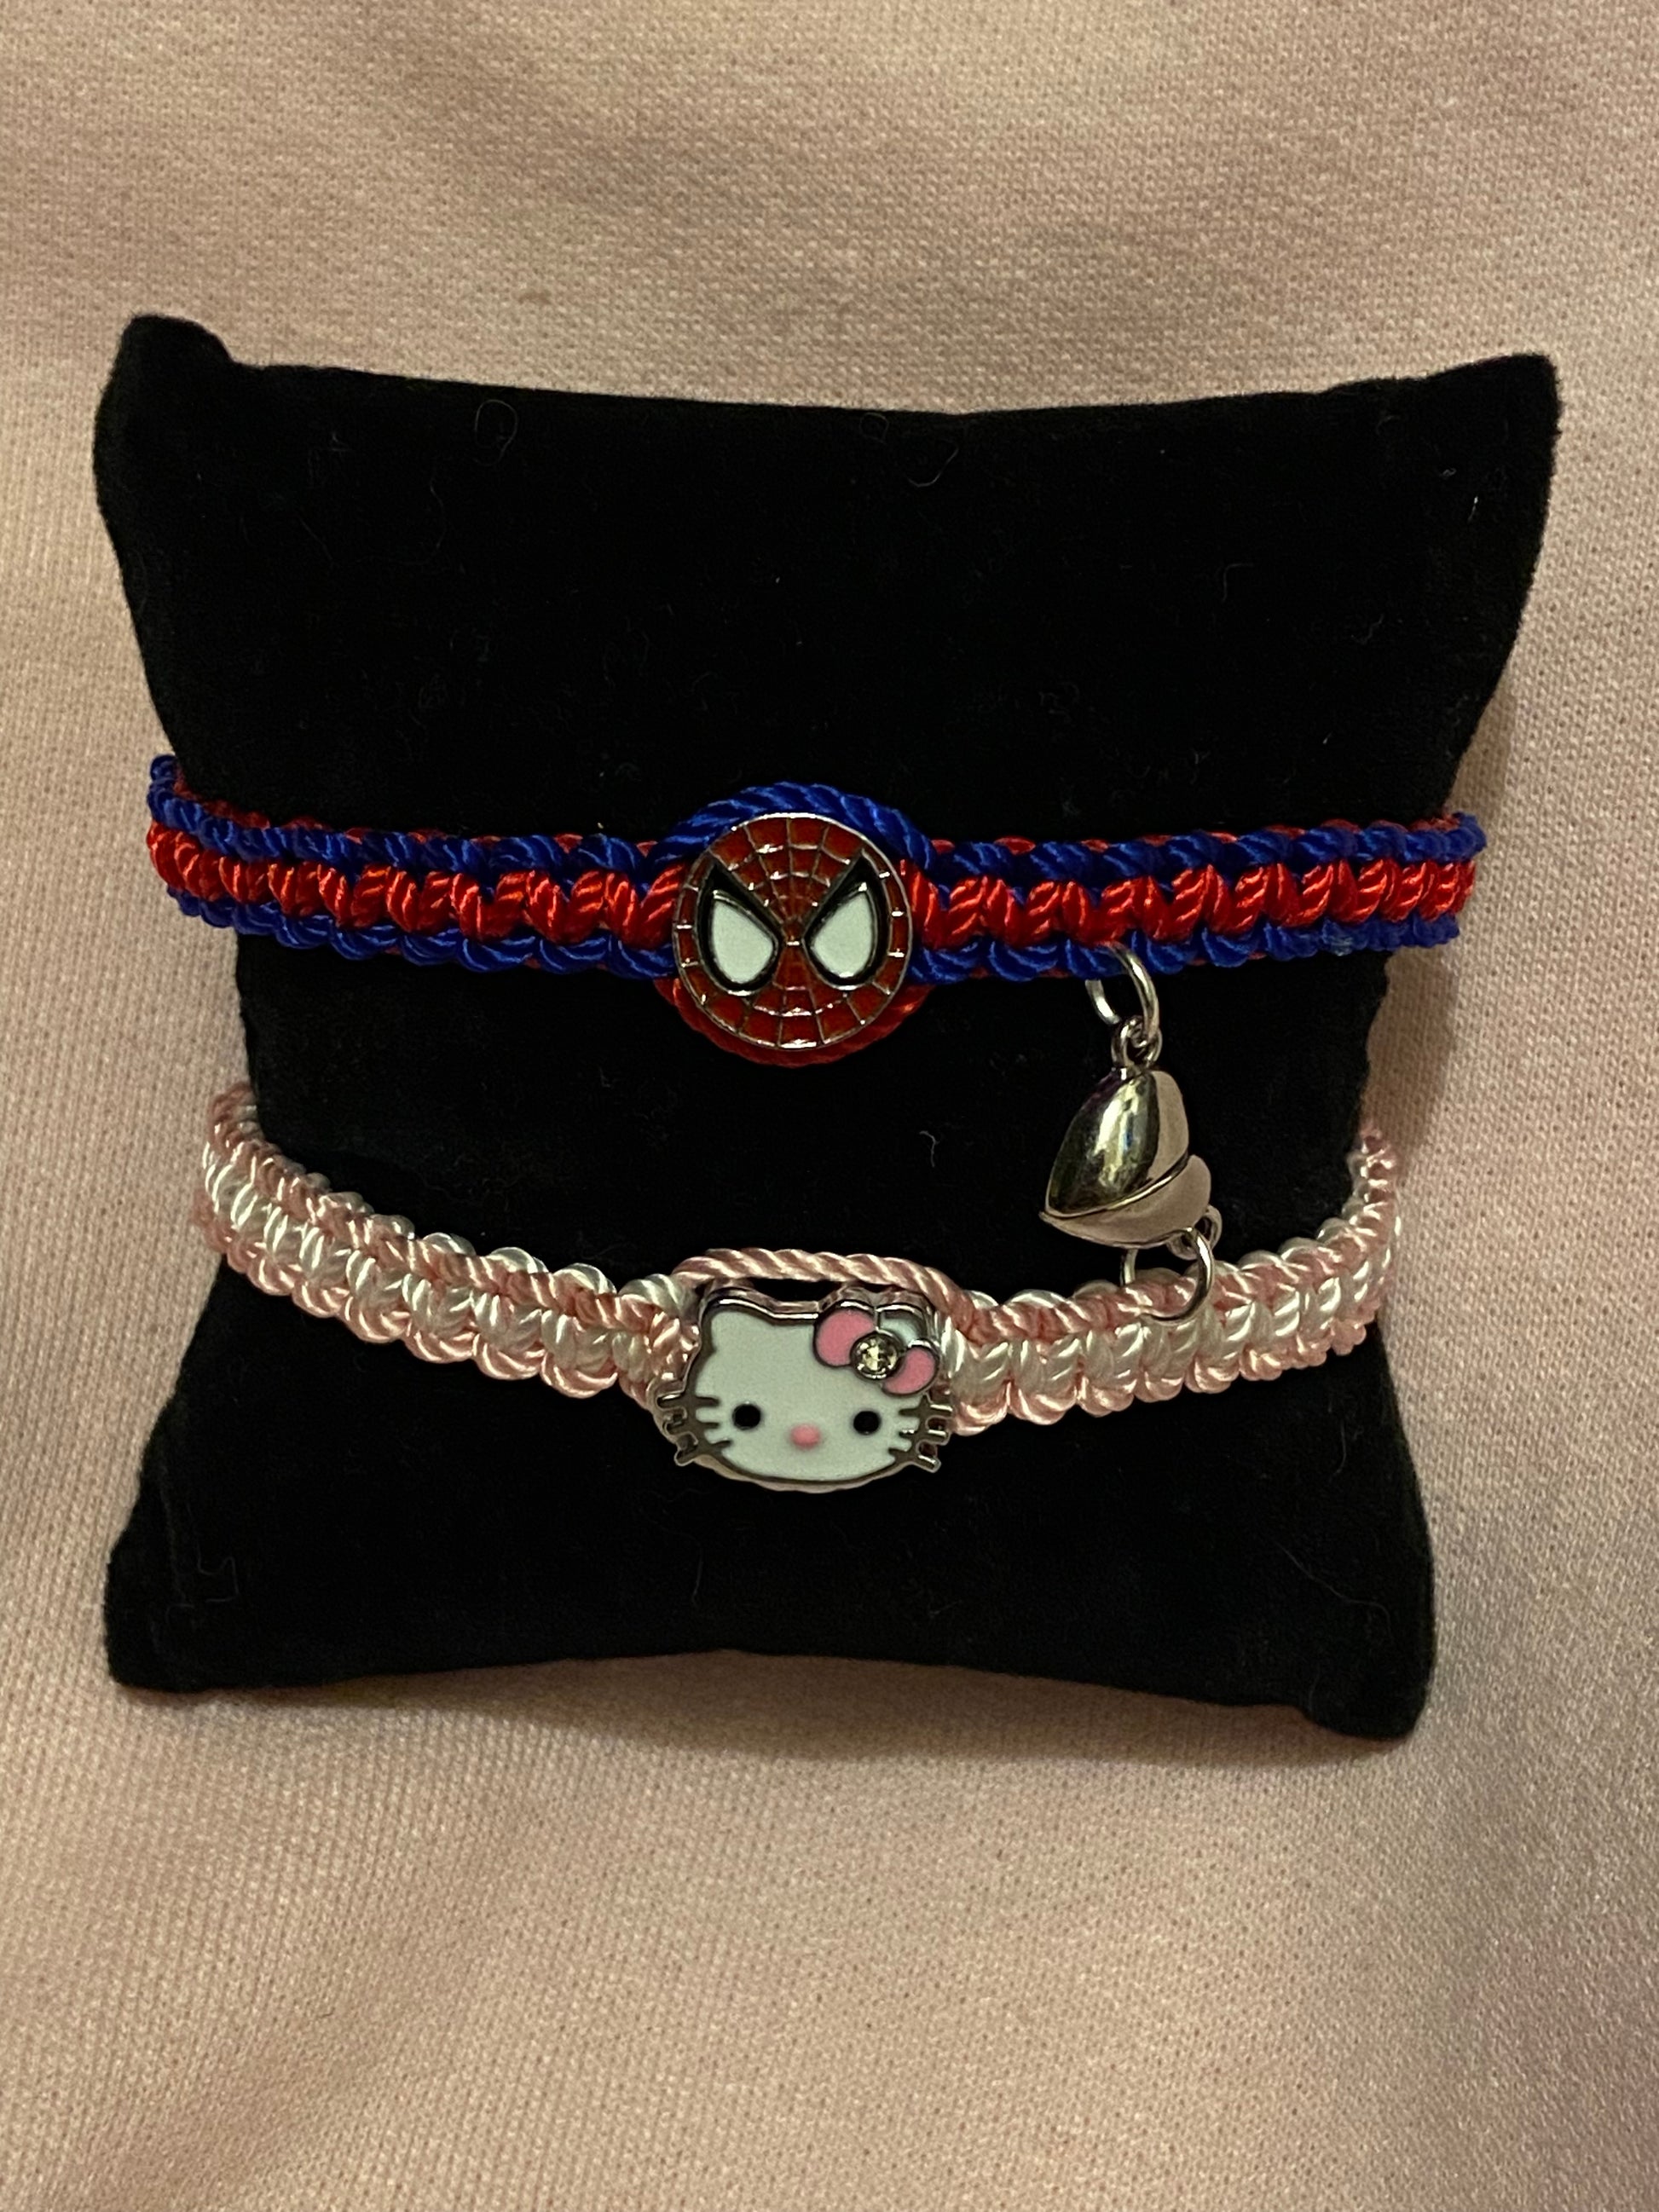 Hello Kitty x Spiderman Matching Bracelets, Without Magnet